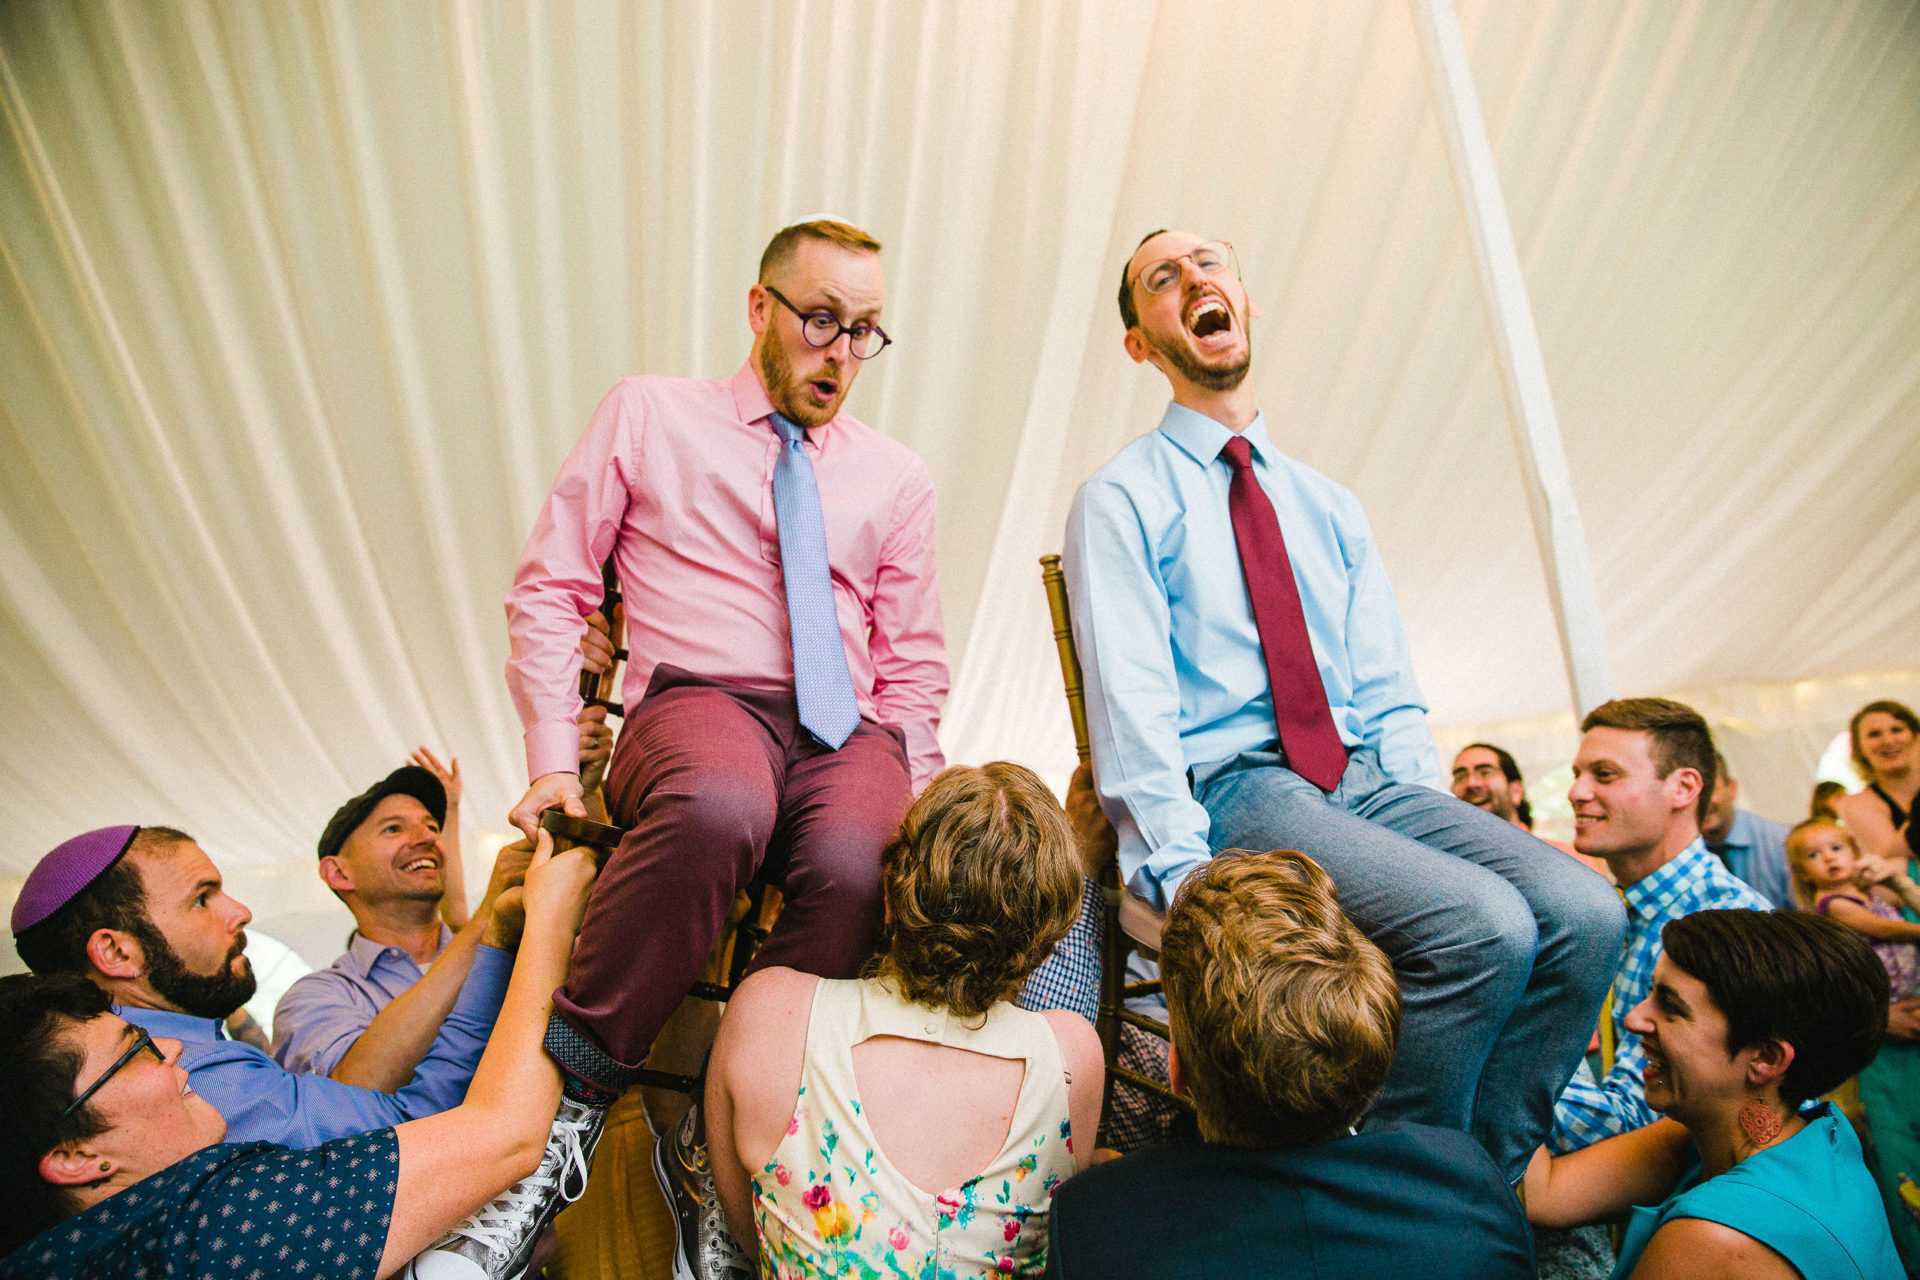 Two grooms raised overhead in chairs for the chair dance in a party tent with looks of shock and joy on their faces